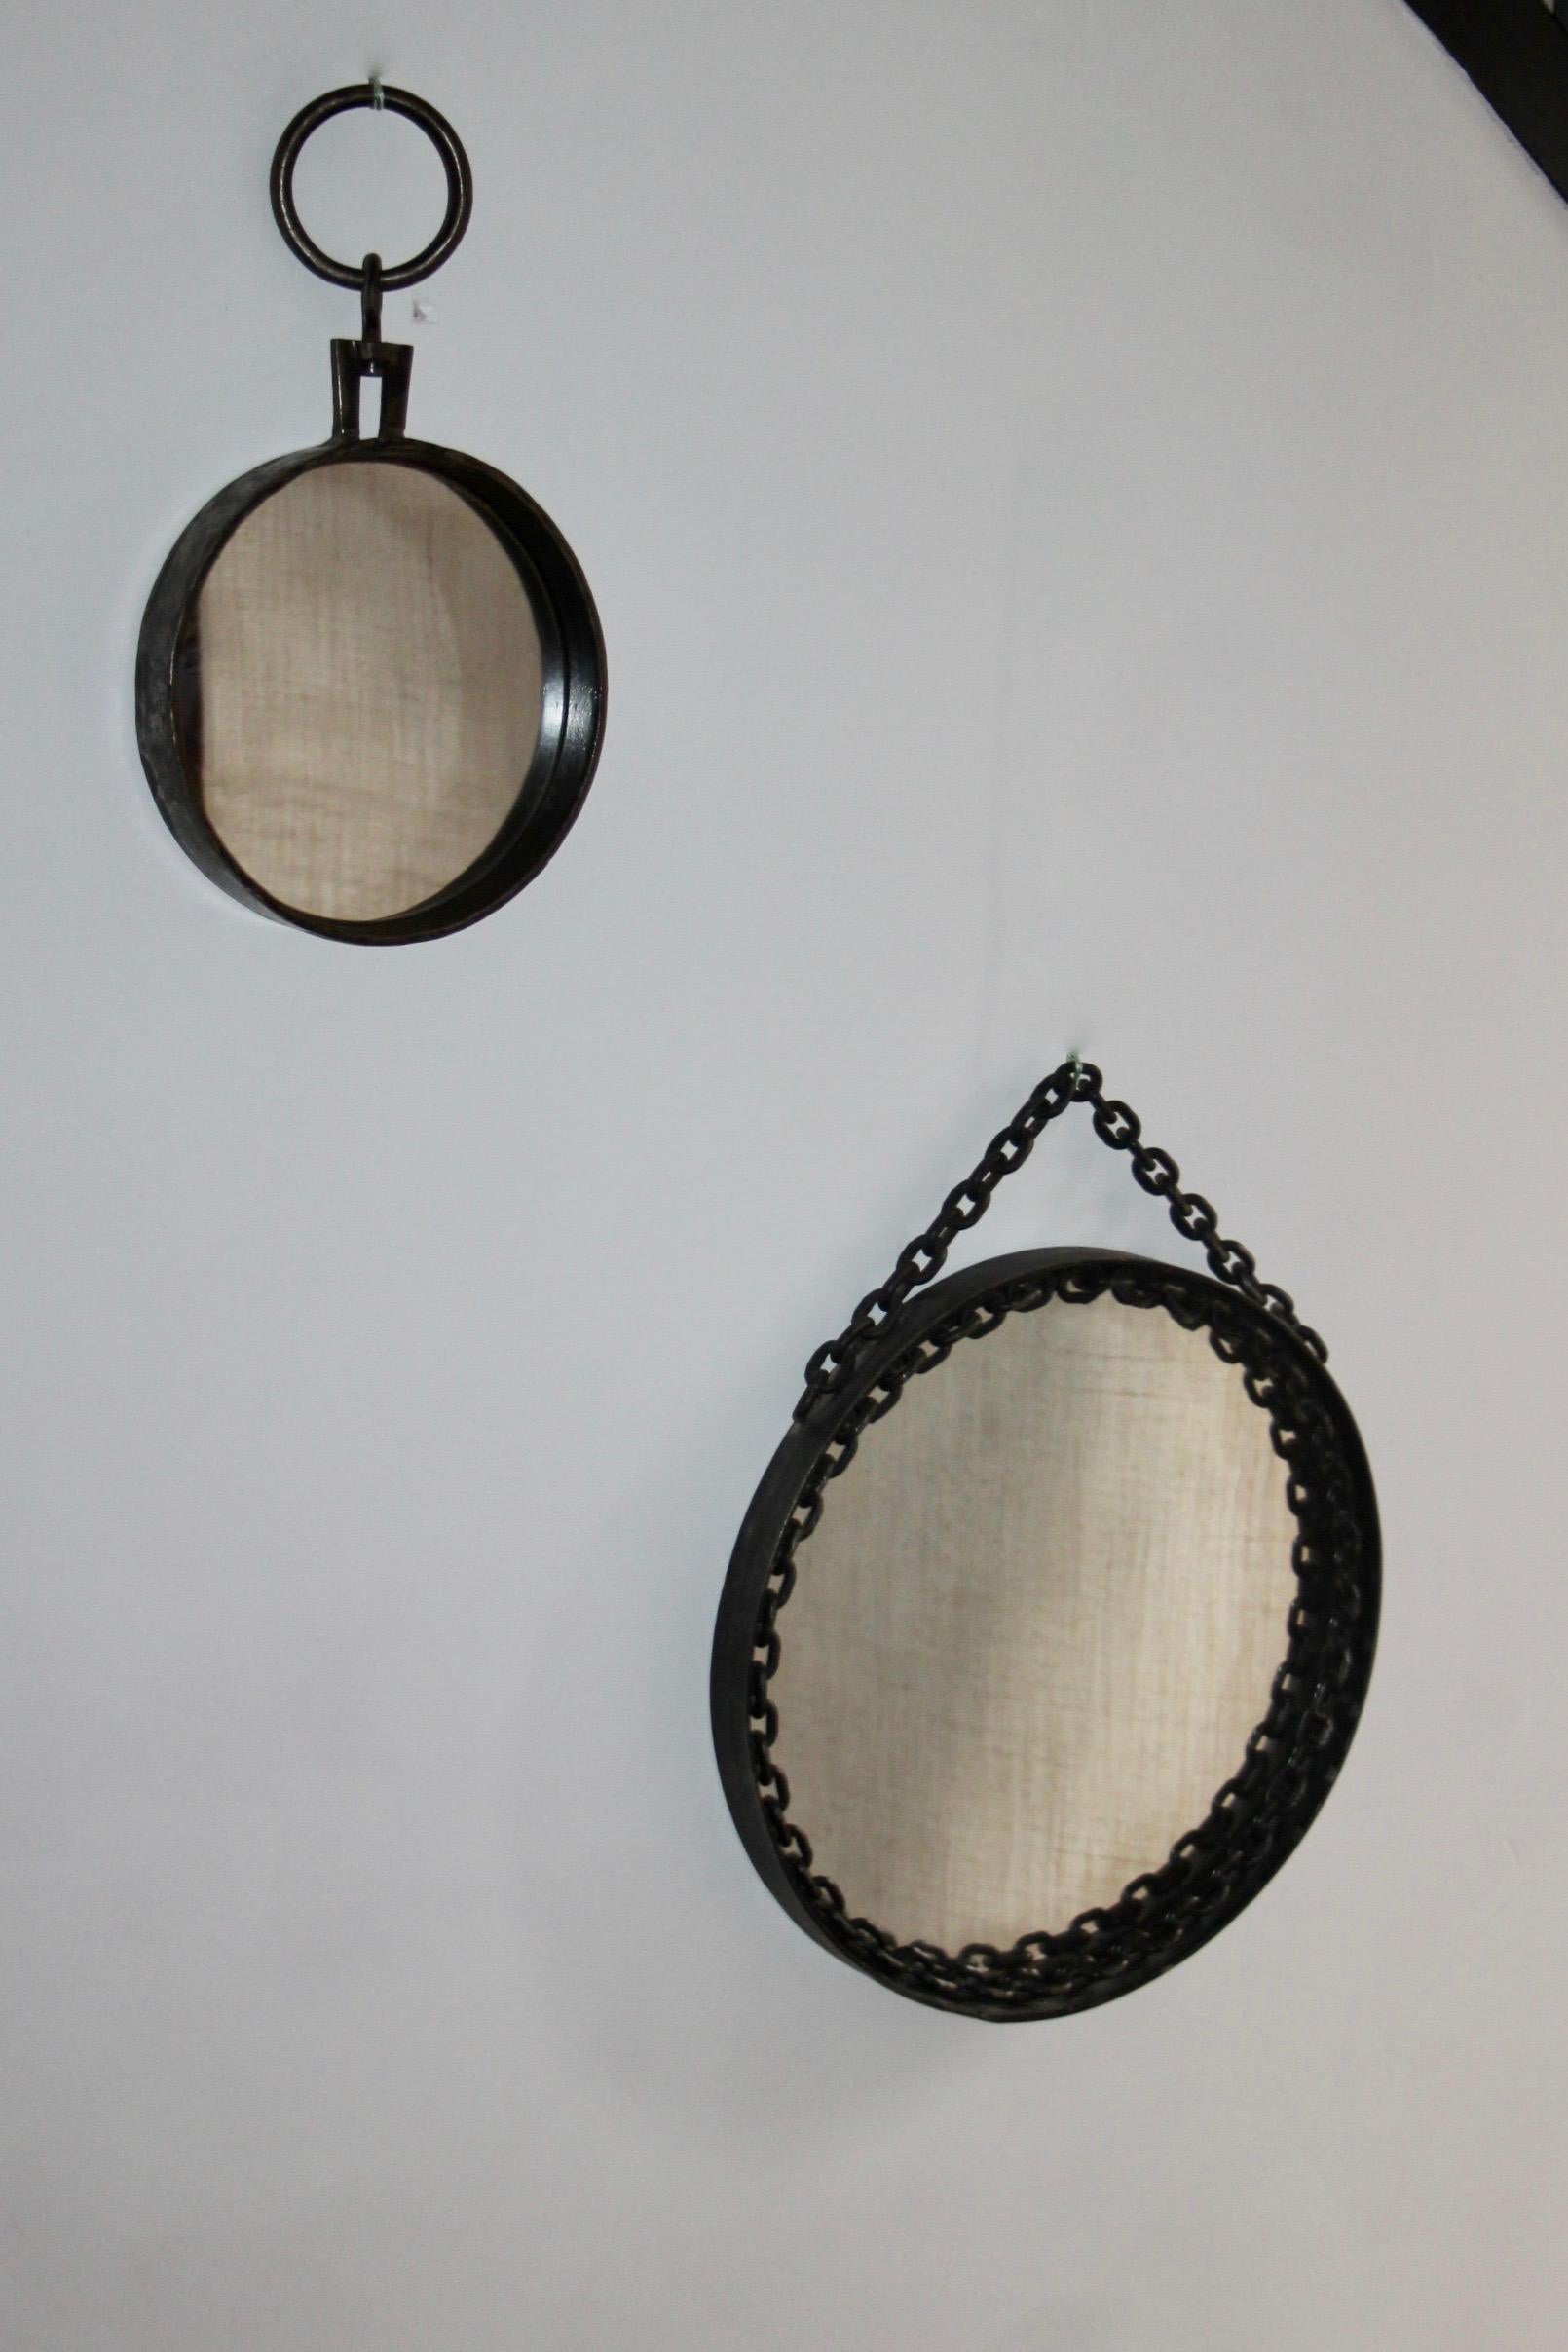 Franz West style round wall mirror in wrought iron.
Black and some silver color appearing as to give a slightly worn out creating a patina effect on the metal. 
The chain part is fixed around the mirror except for the upper part that is to be hung